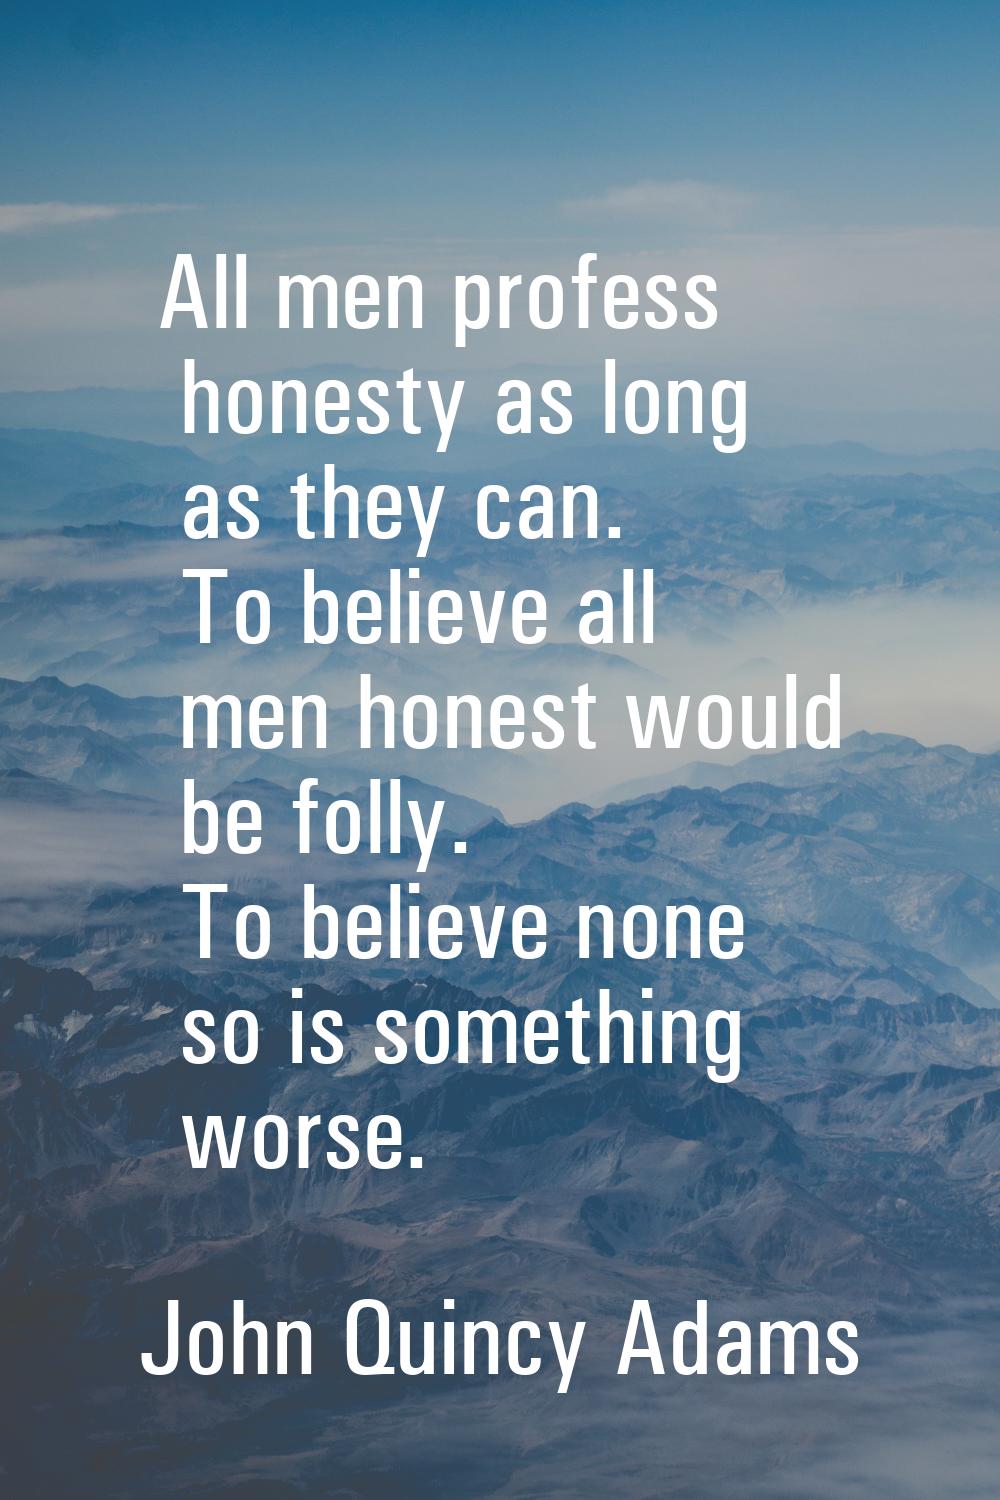 All men profess honesty as long as they can. To believe all men honest would be folly. To believe n